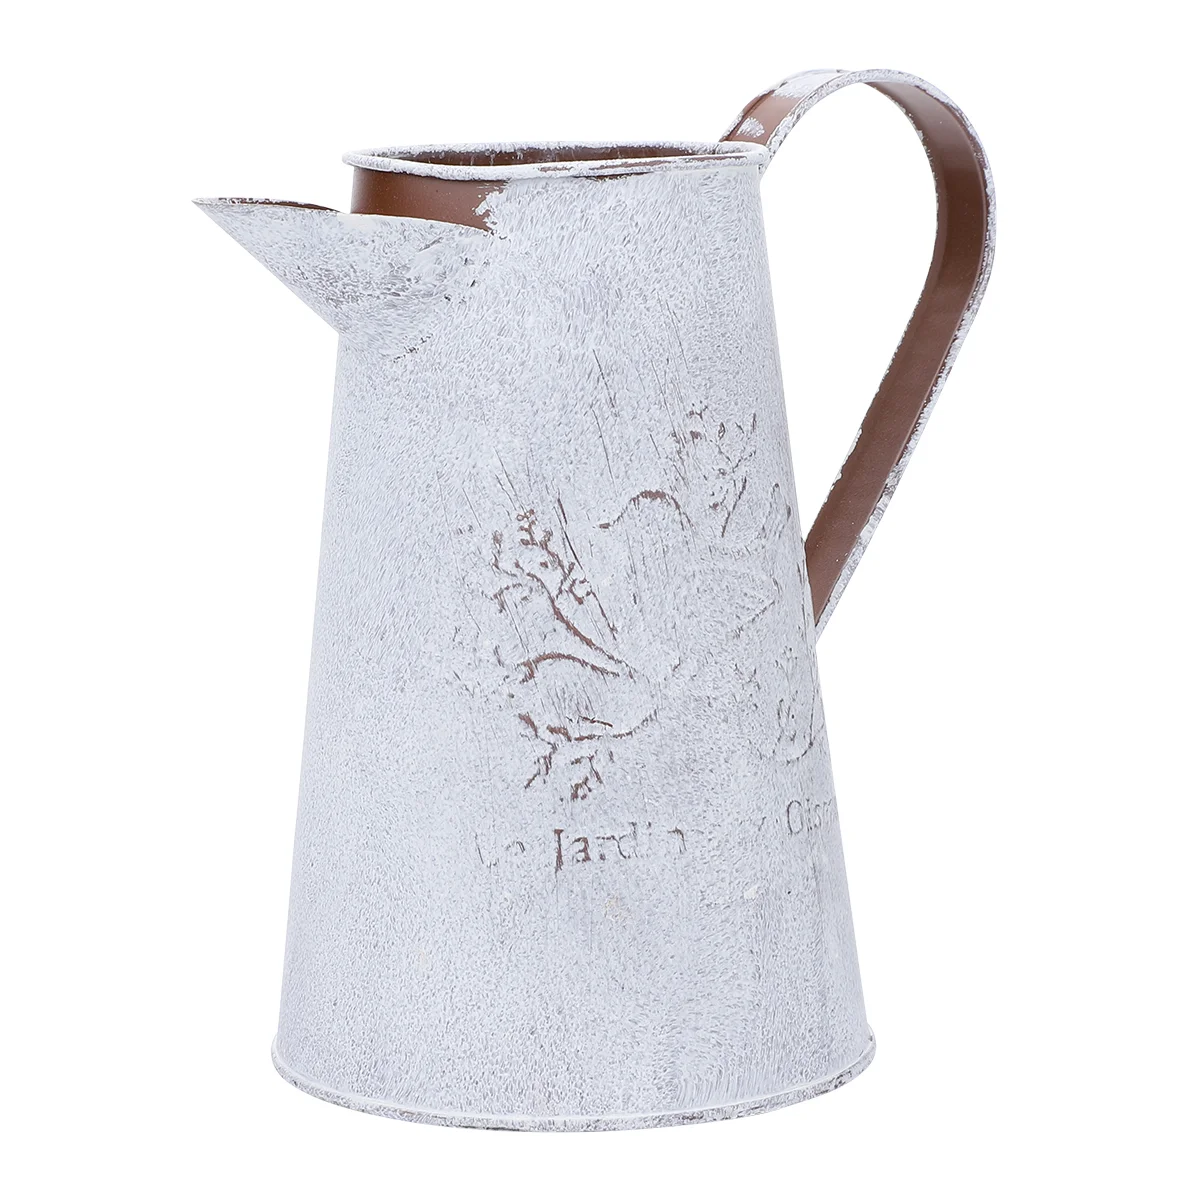 

Home Décor Garden Tin Jug Water Can Plants Large Floor Vase White Flower Vase Rustic Pitcher Watering Can